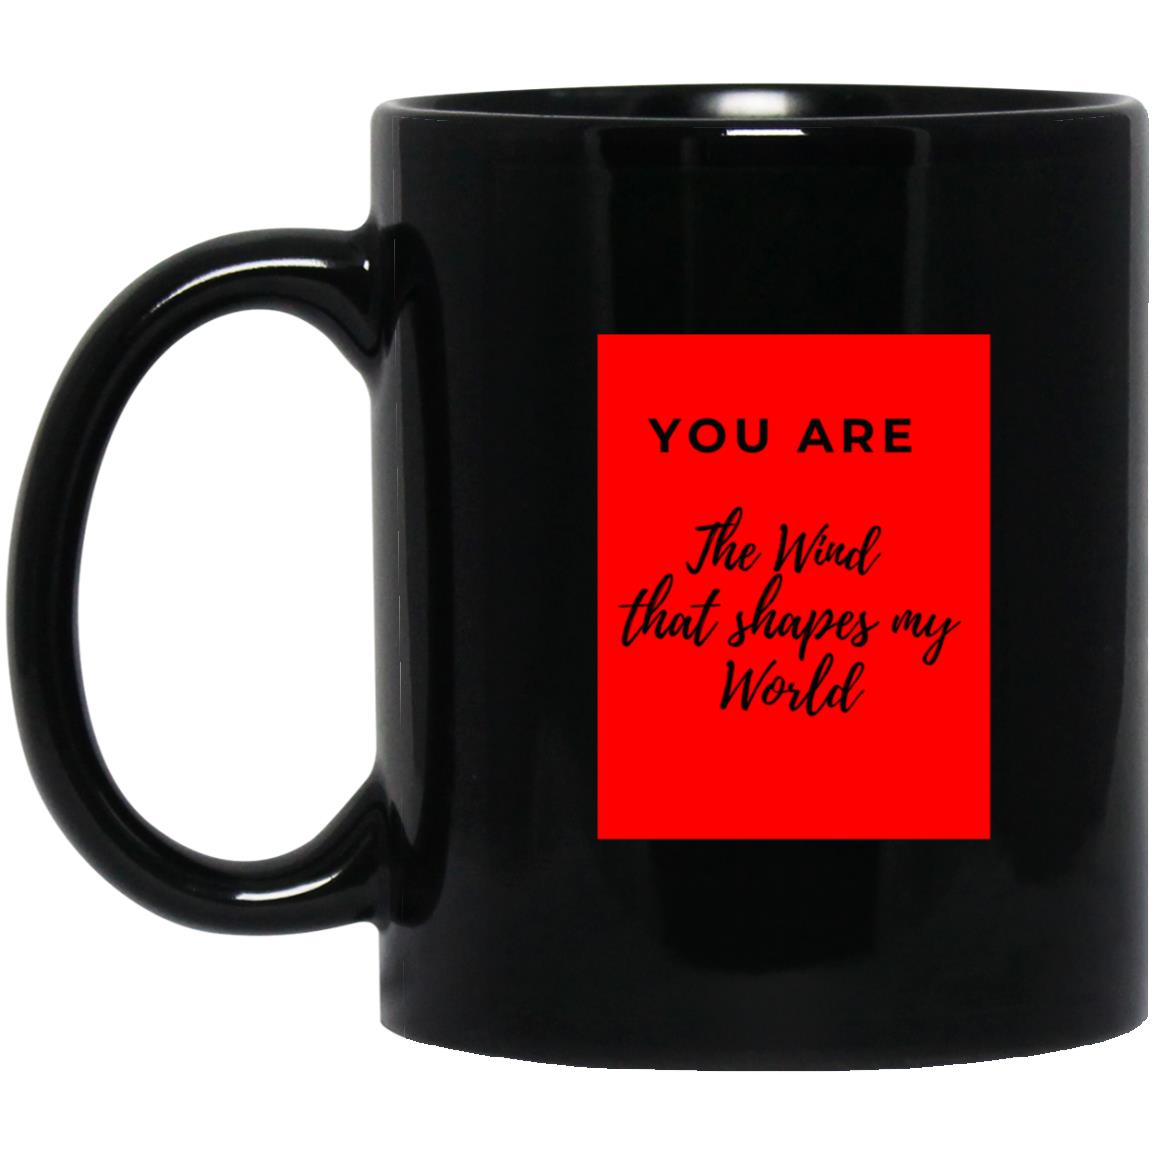 You are the Wind that shapes my world  Mugs - Group 5